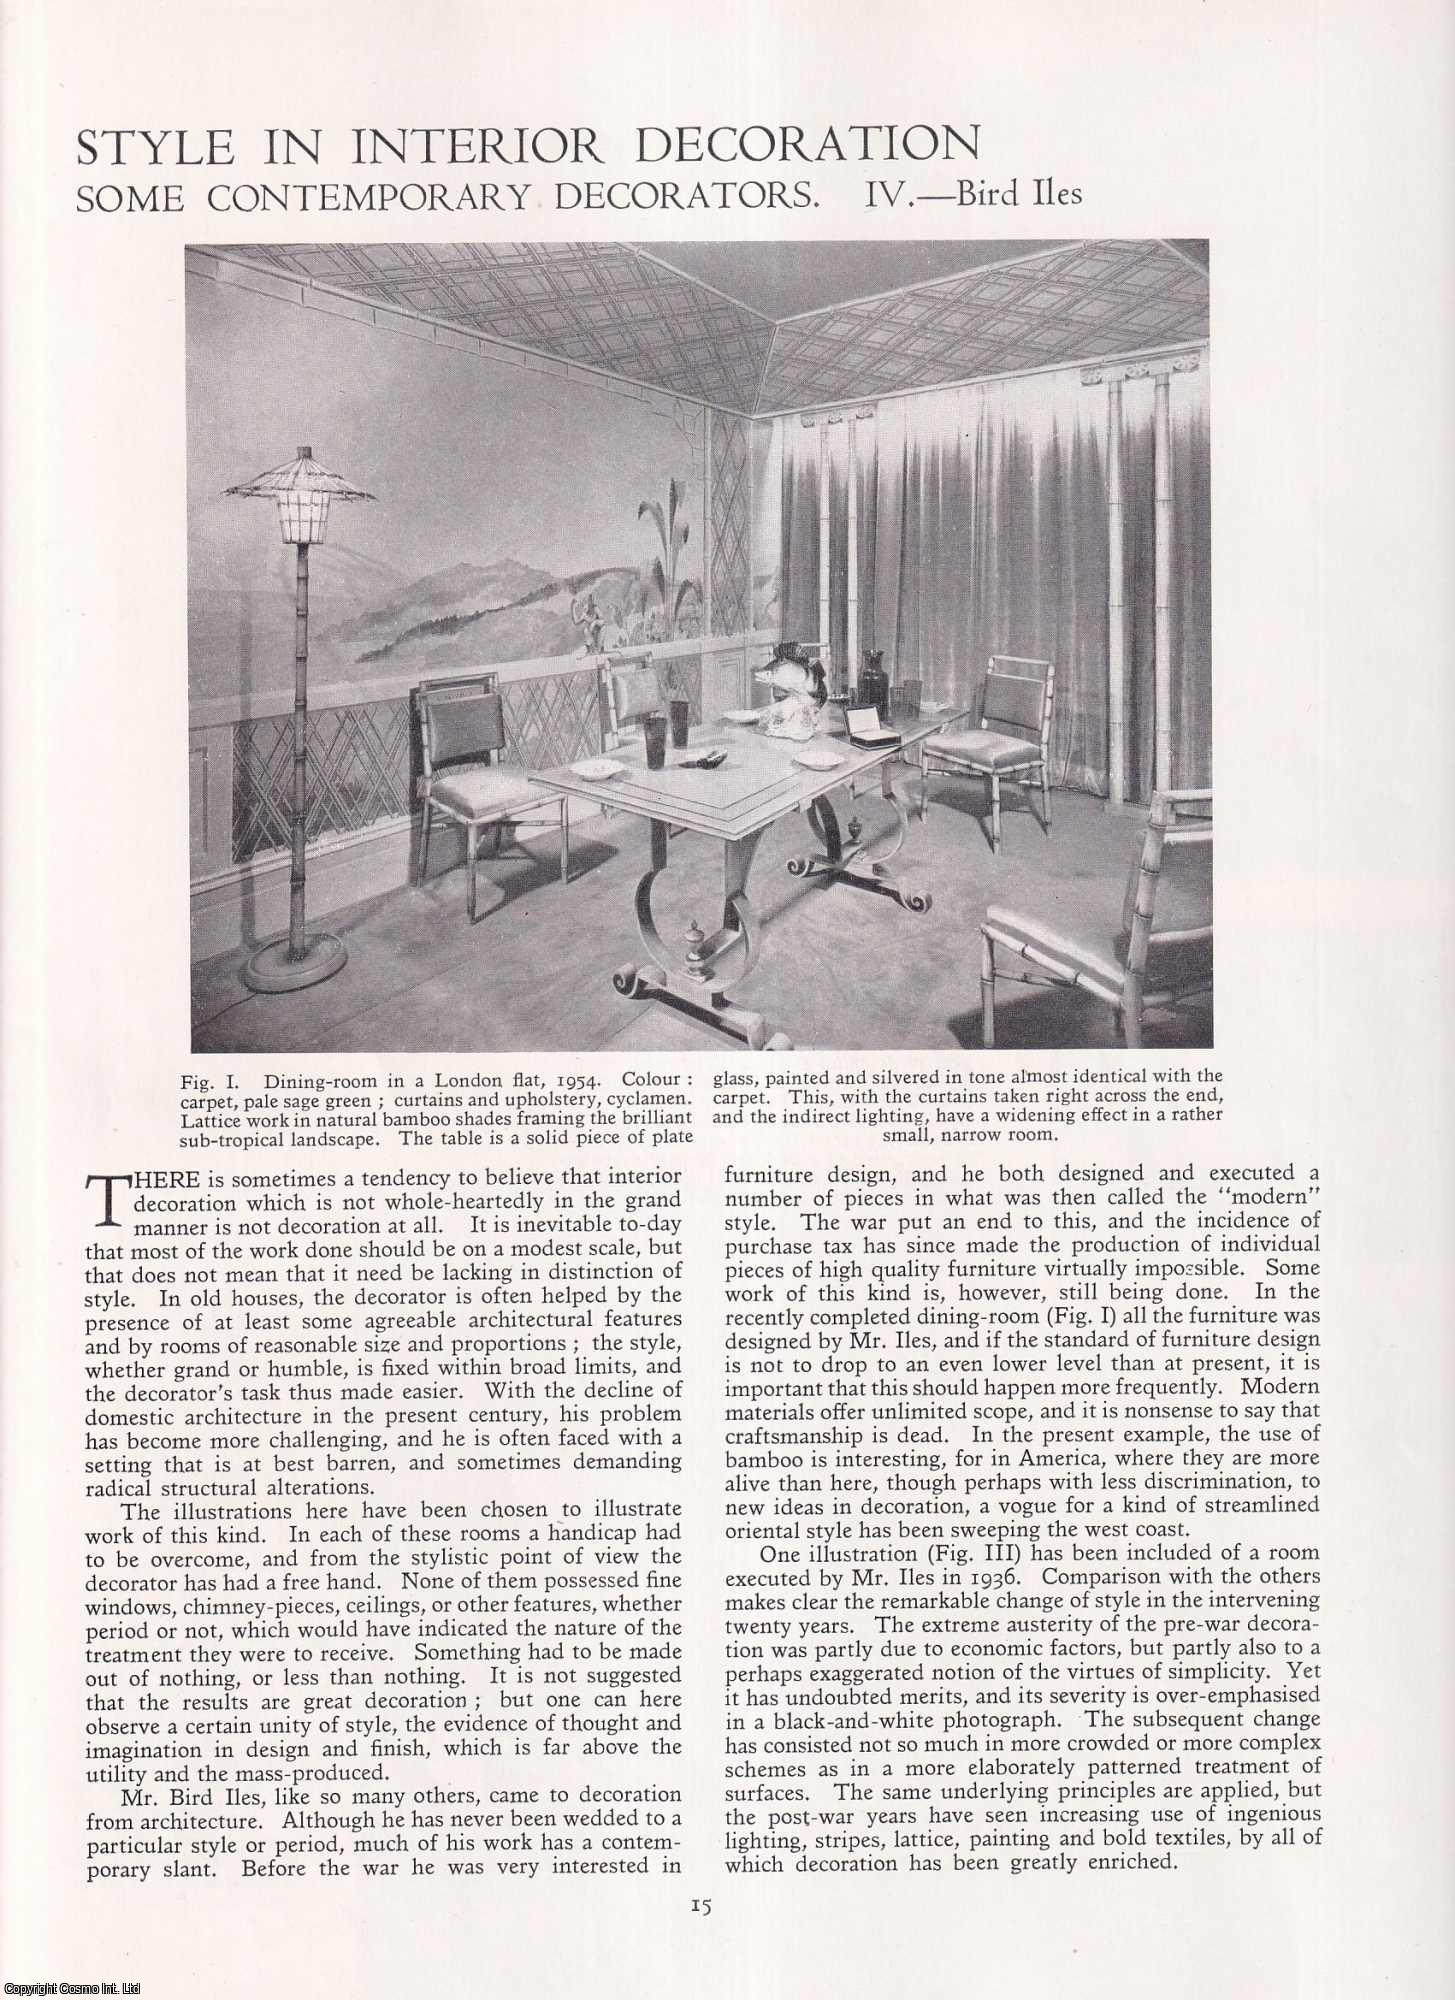 Not stated - Style in Interior Decoration, Contemporary Decorators: Bird Iles. An original article from Apollo, International Magazine of the Arts, 1957.